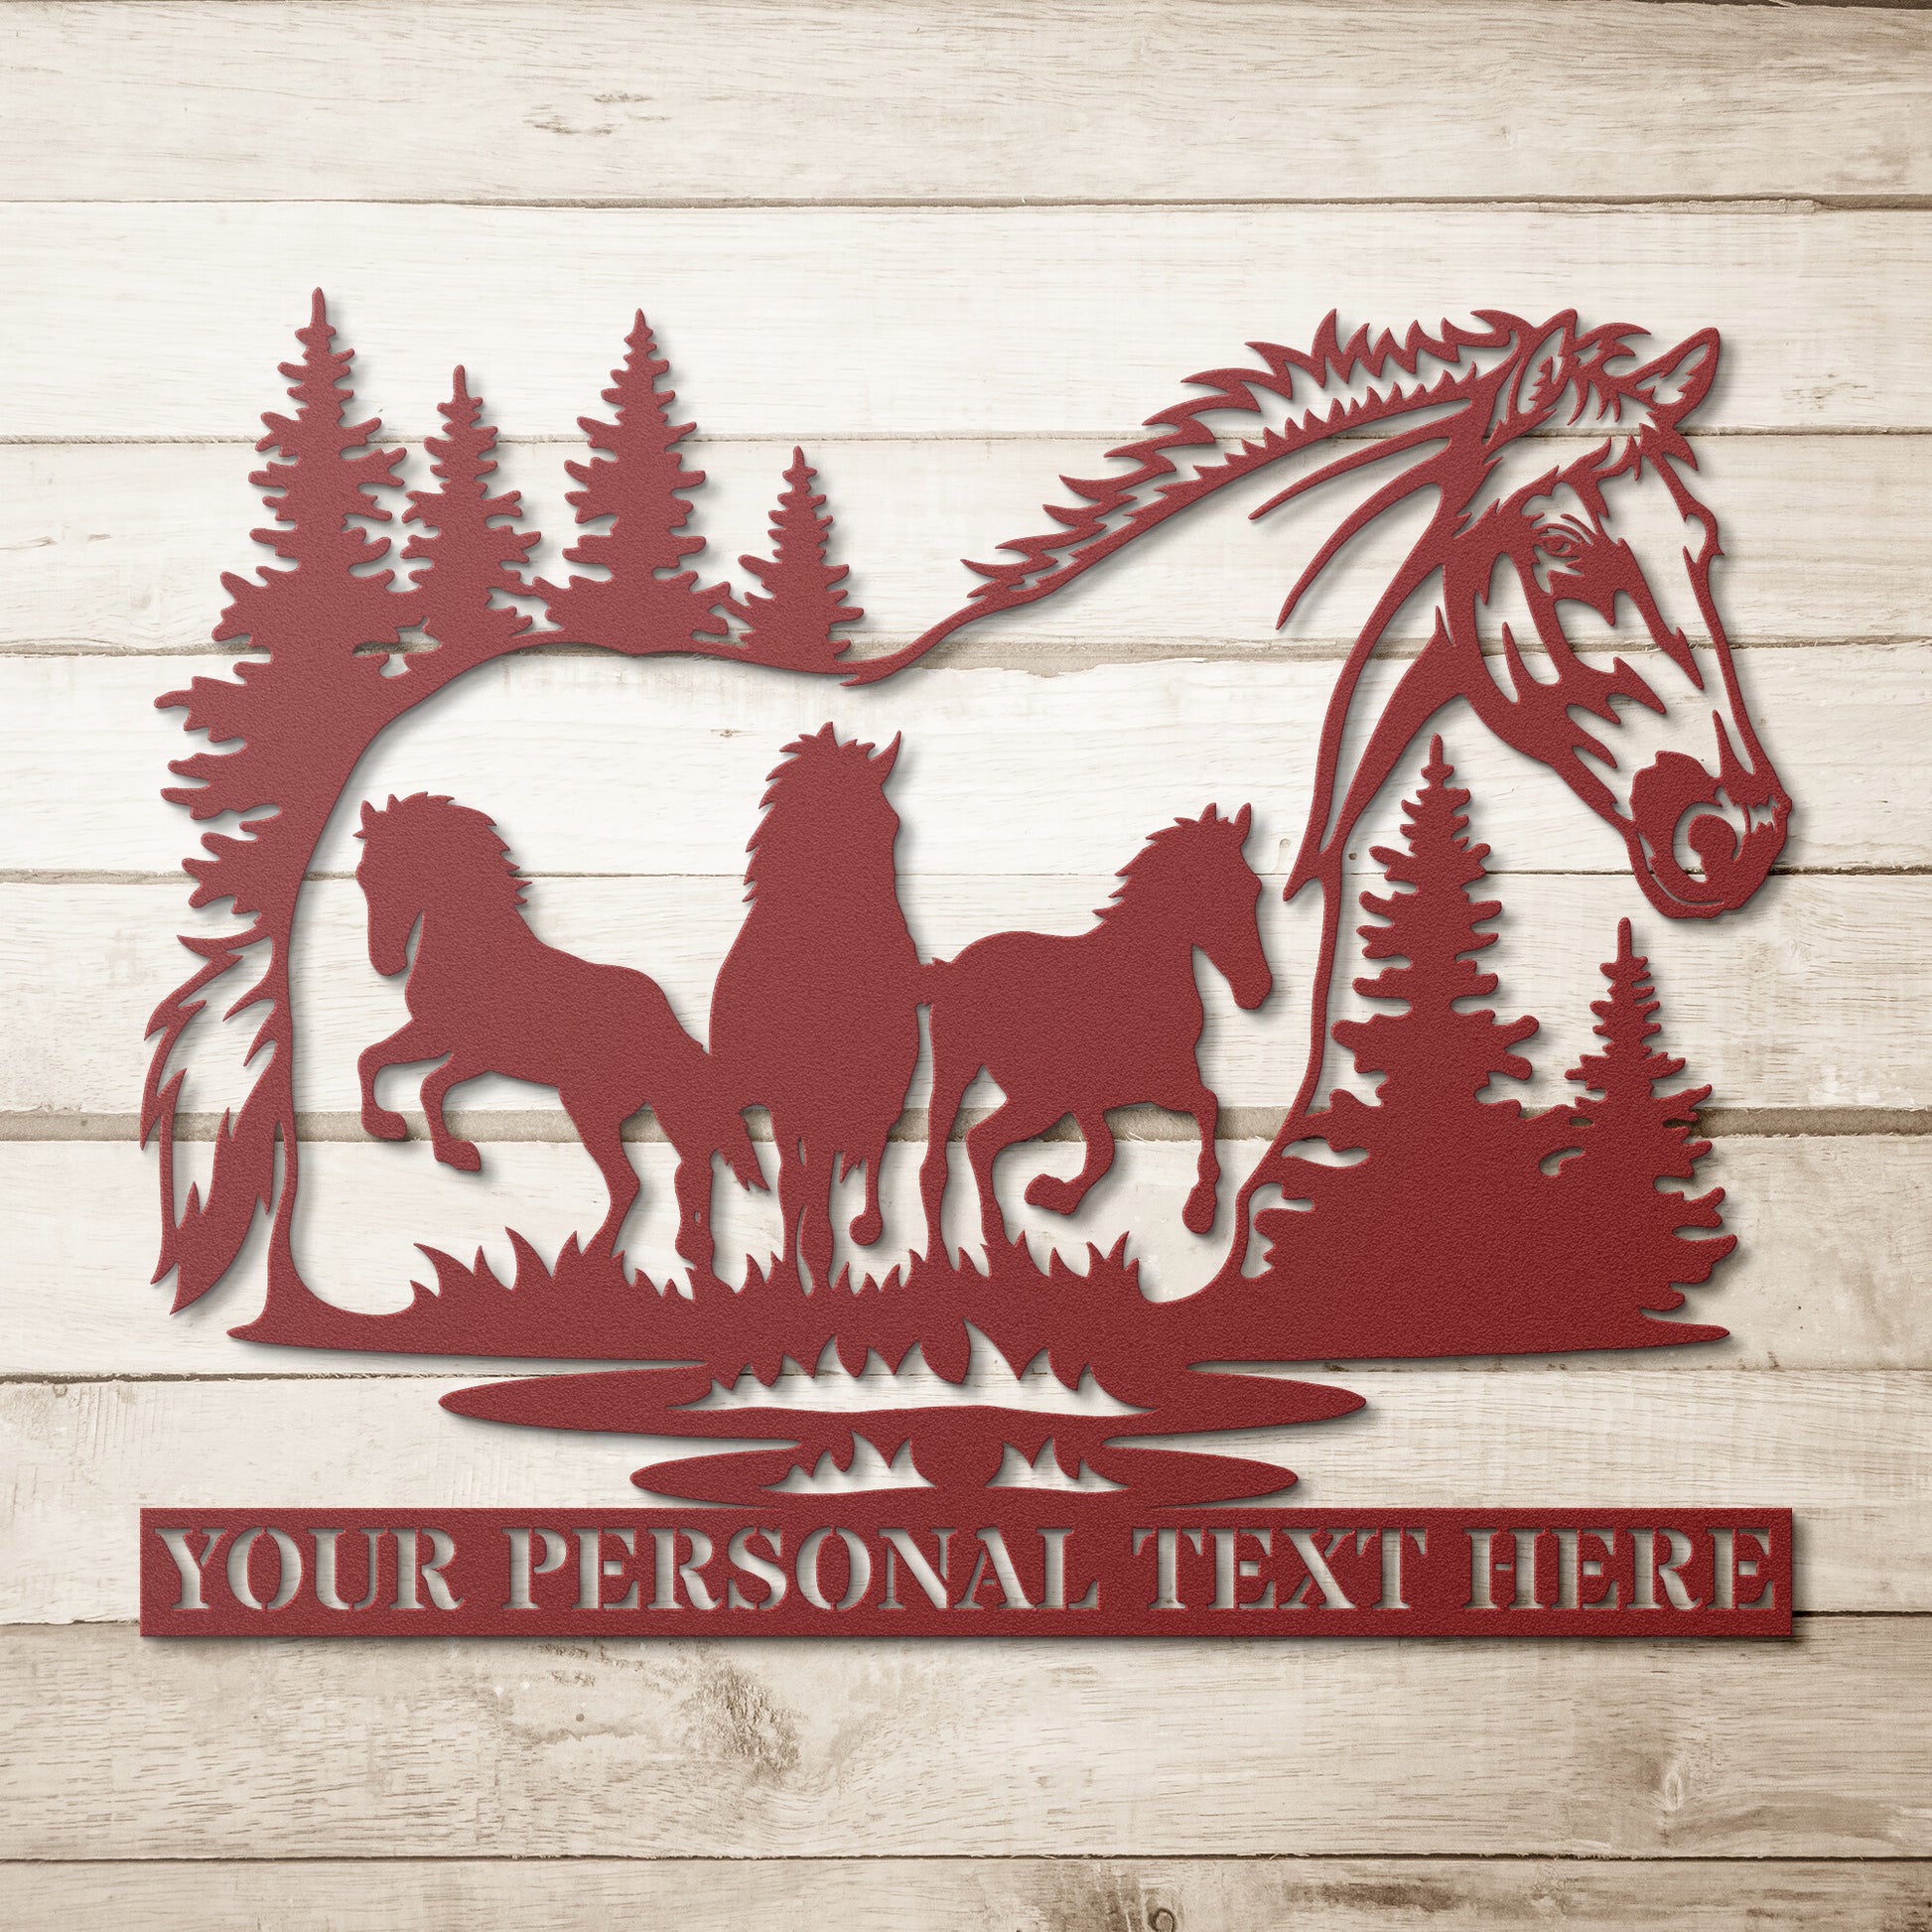 Personalized Horse Silhouette Name Metal Sign Gift. Custom Nature Wildlife Wall Decor. Horse Steel Sign Monogram, Horse Ranch Wall Hanging